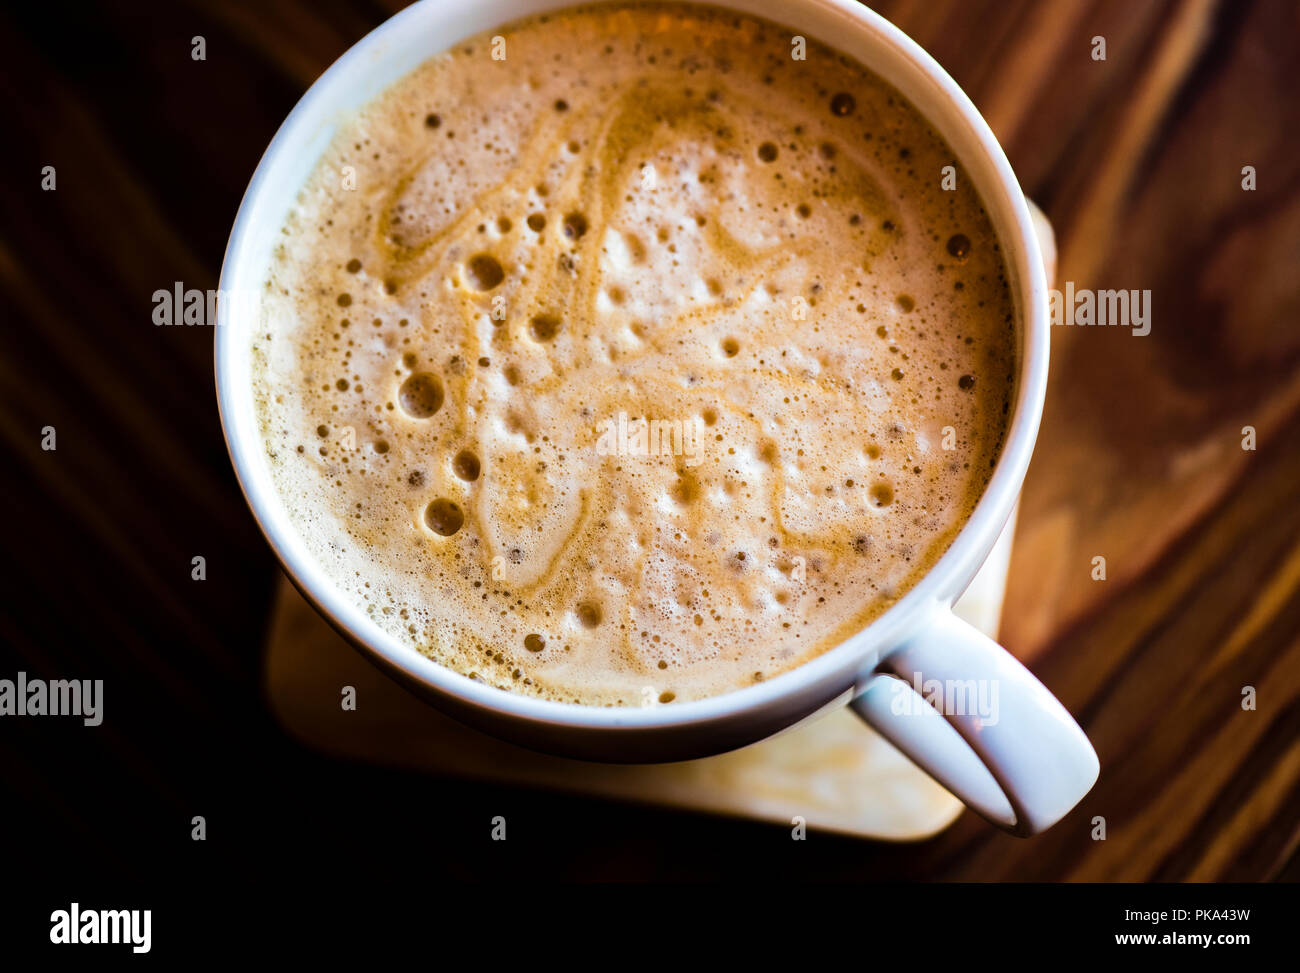 Foam on a cappuccino in a white china cup. Stock Photo